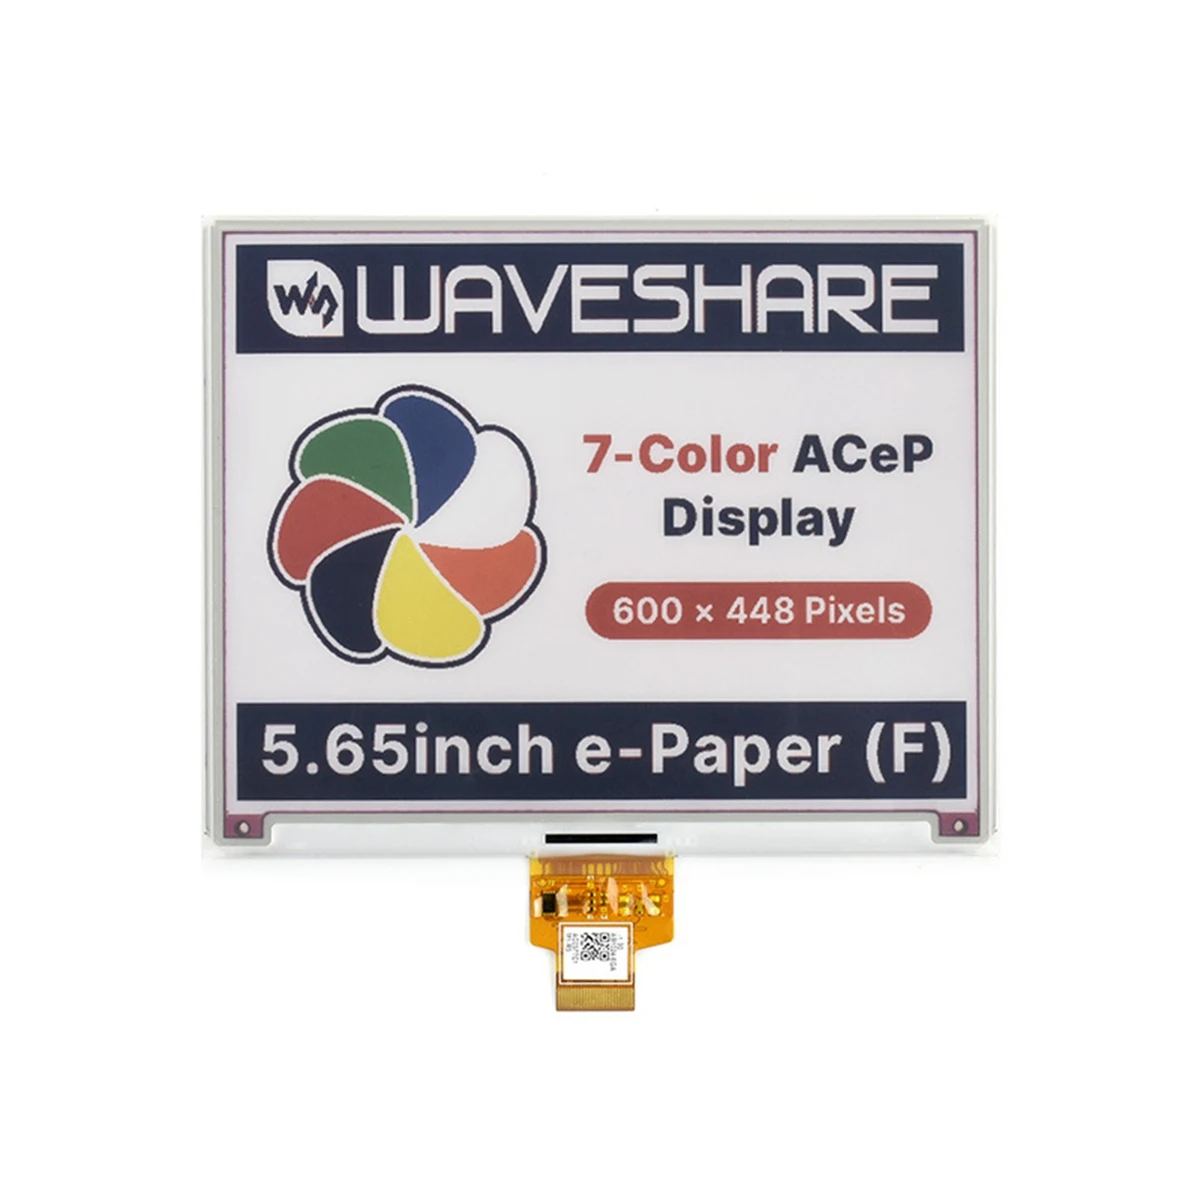 

Waveshare 5.65Inch Colorful E-Paper E-Ink Raw Display, 600X448 Pixels, ACeP 7-Color, SPI Interface Supports